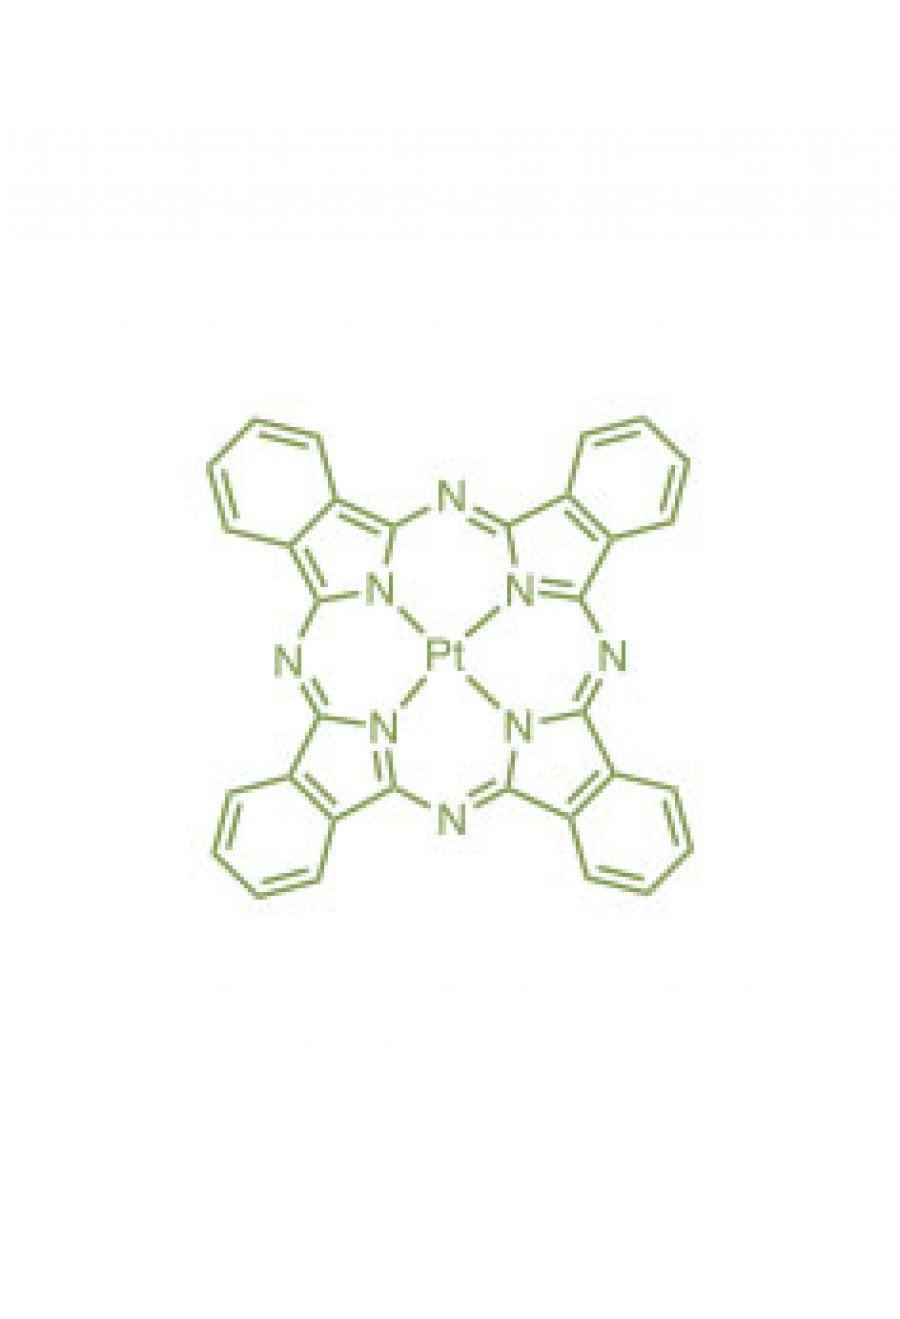 platinum(II) phthalocyanine   | Porphychem Expert porphyrin synthesis for research & industry